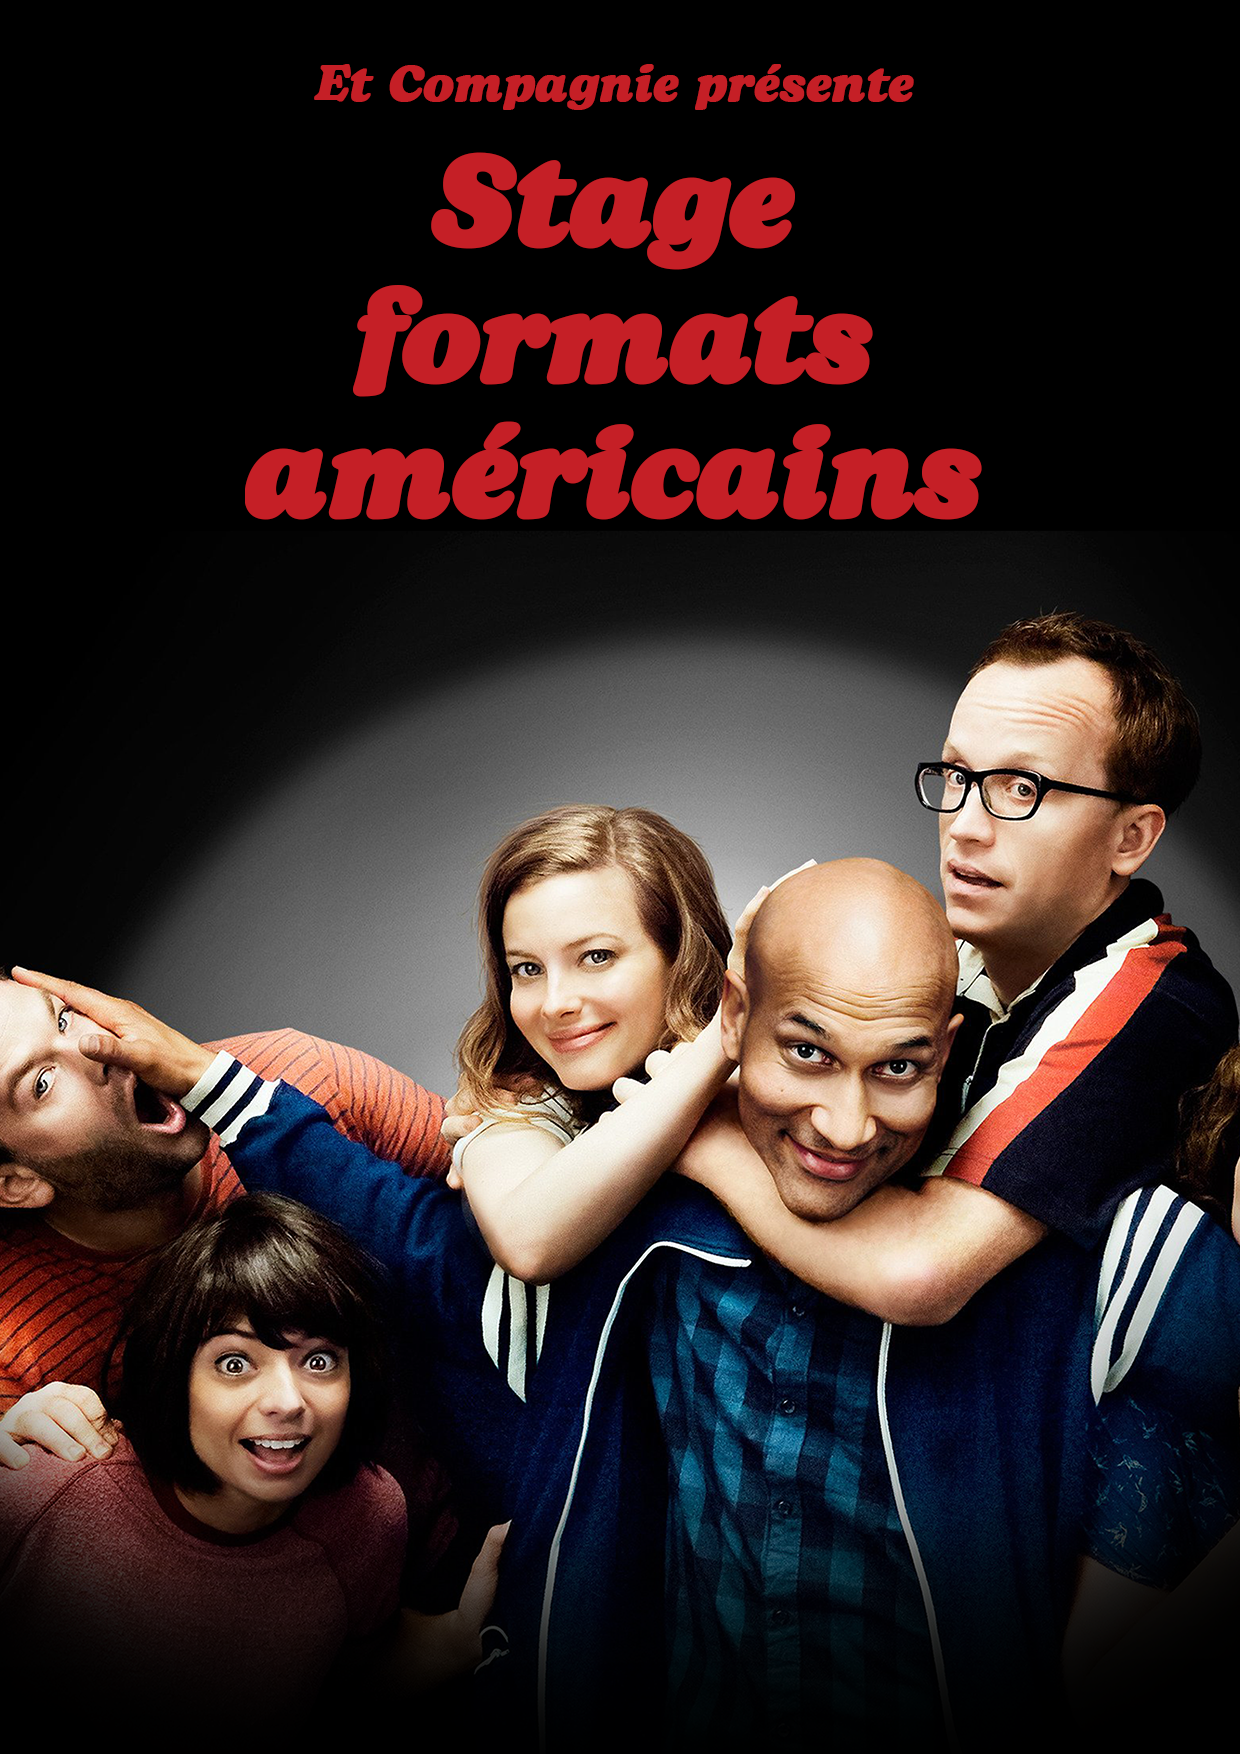 Stage formats américains